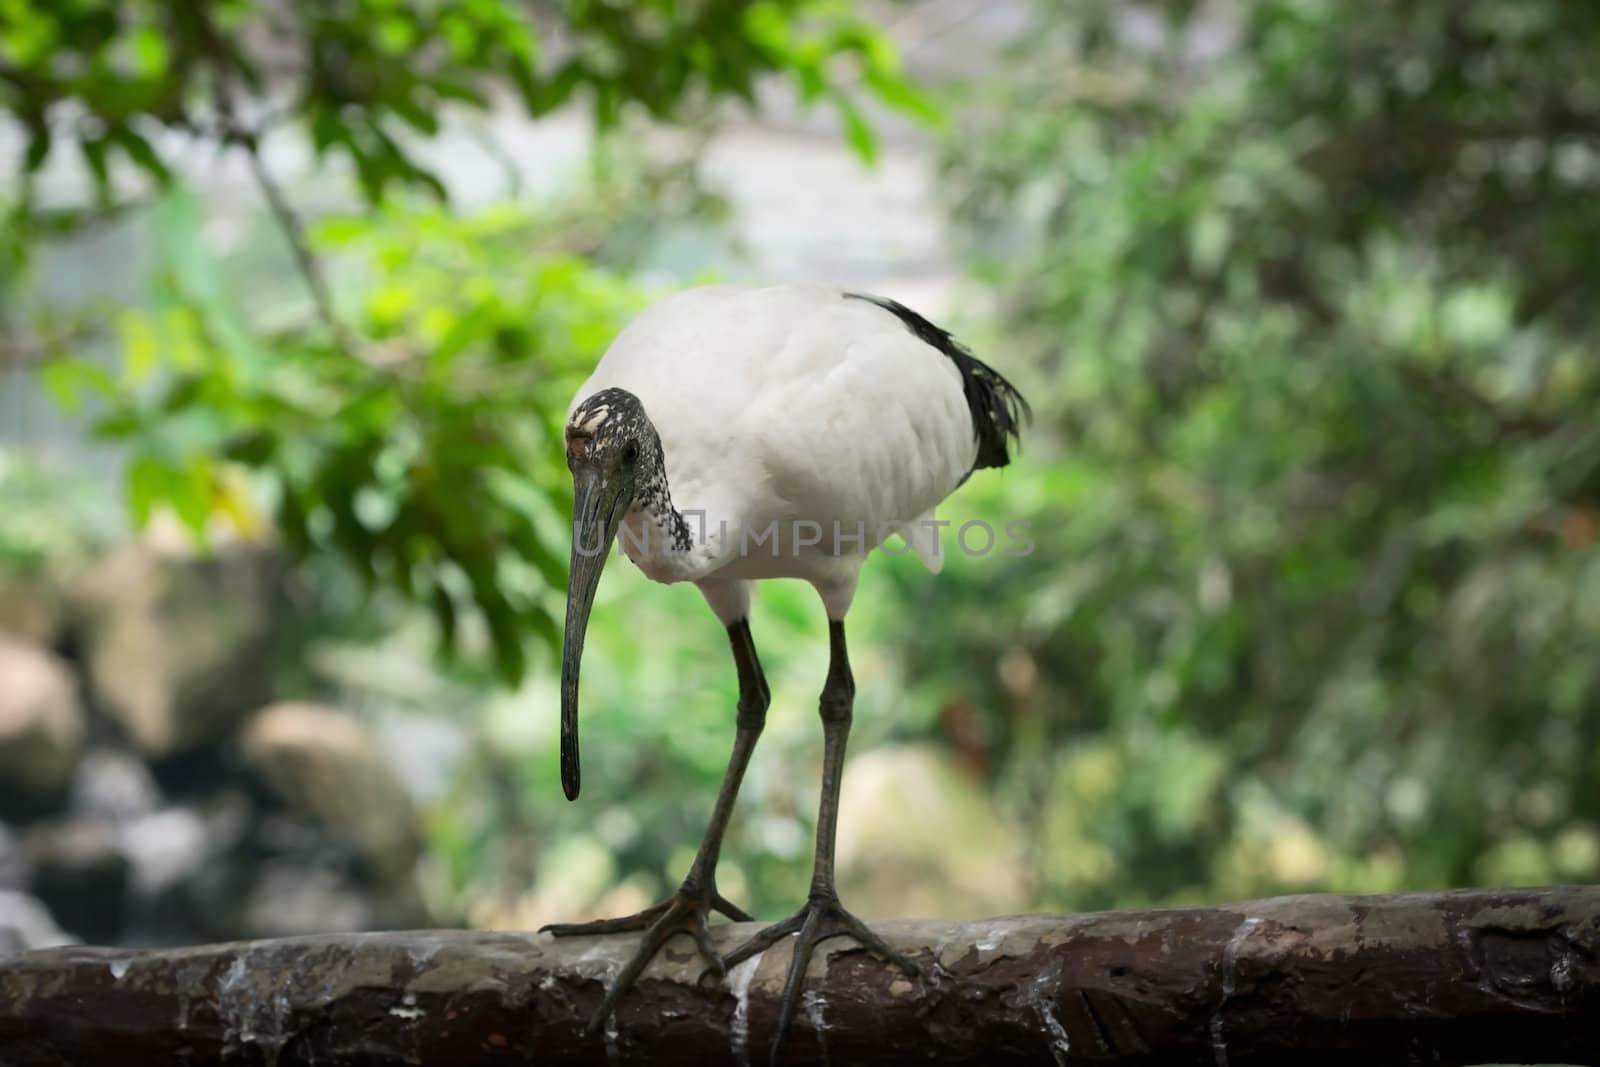 African Sacred Ibis (Threskiornis aethiopicus) bird resting on a log with green trees on background